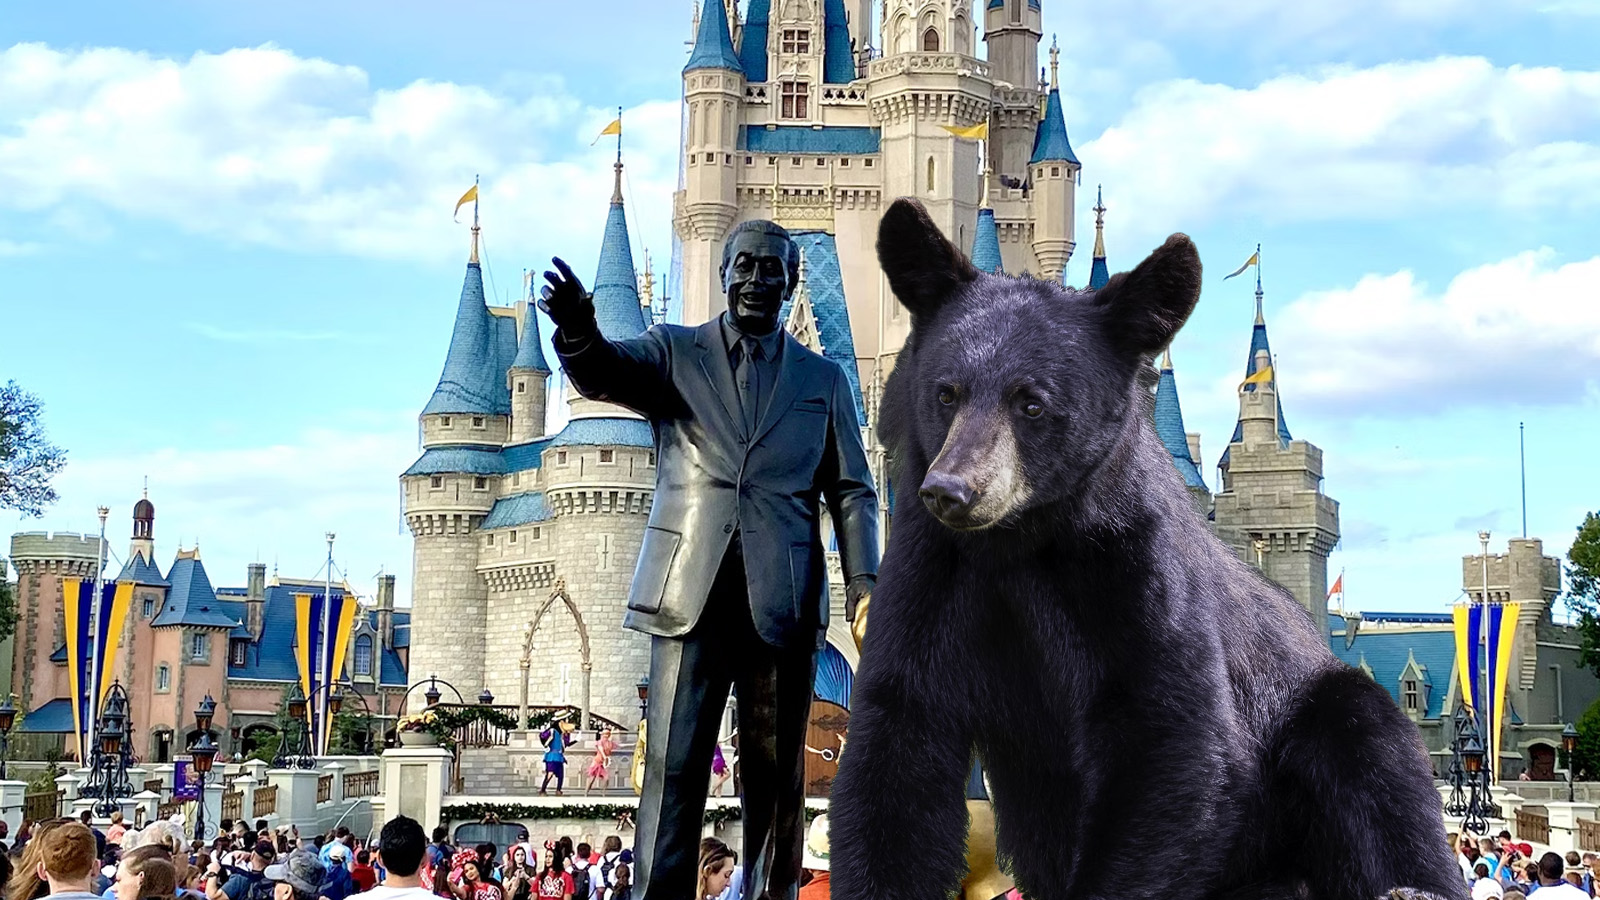 Disney World forced to close rides after finding wild bear in park